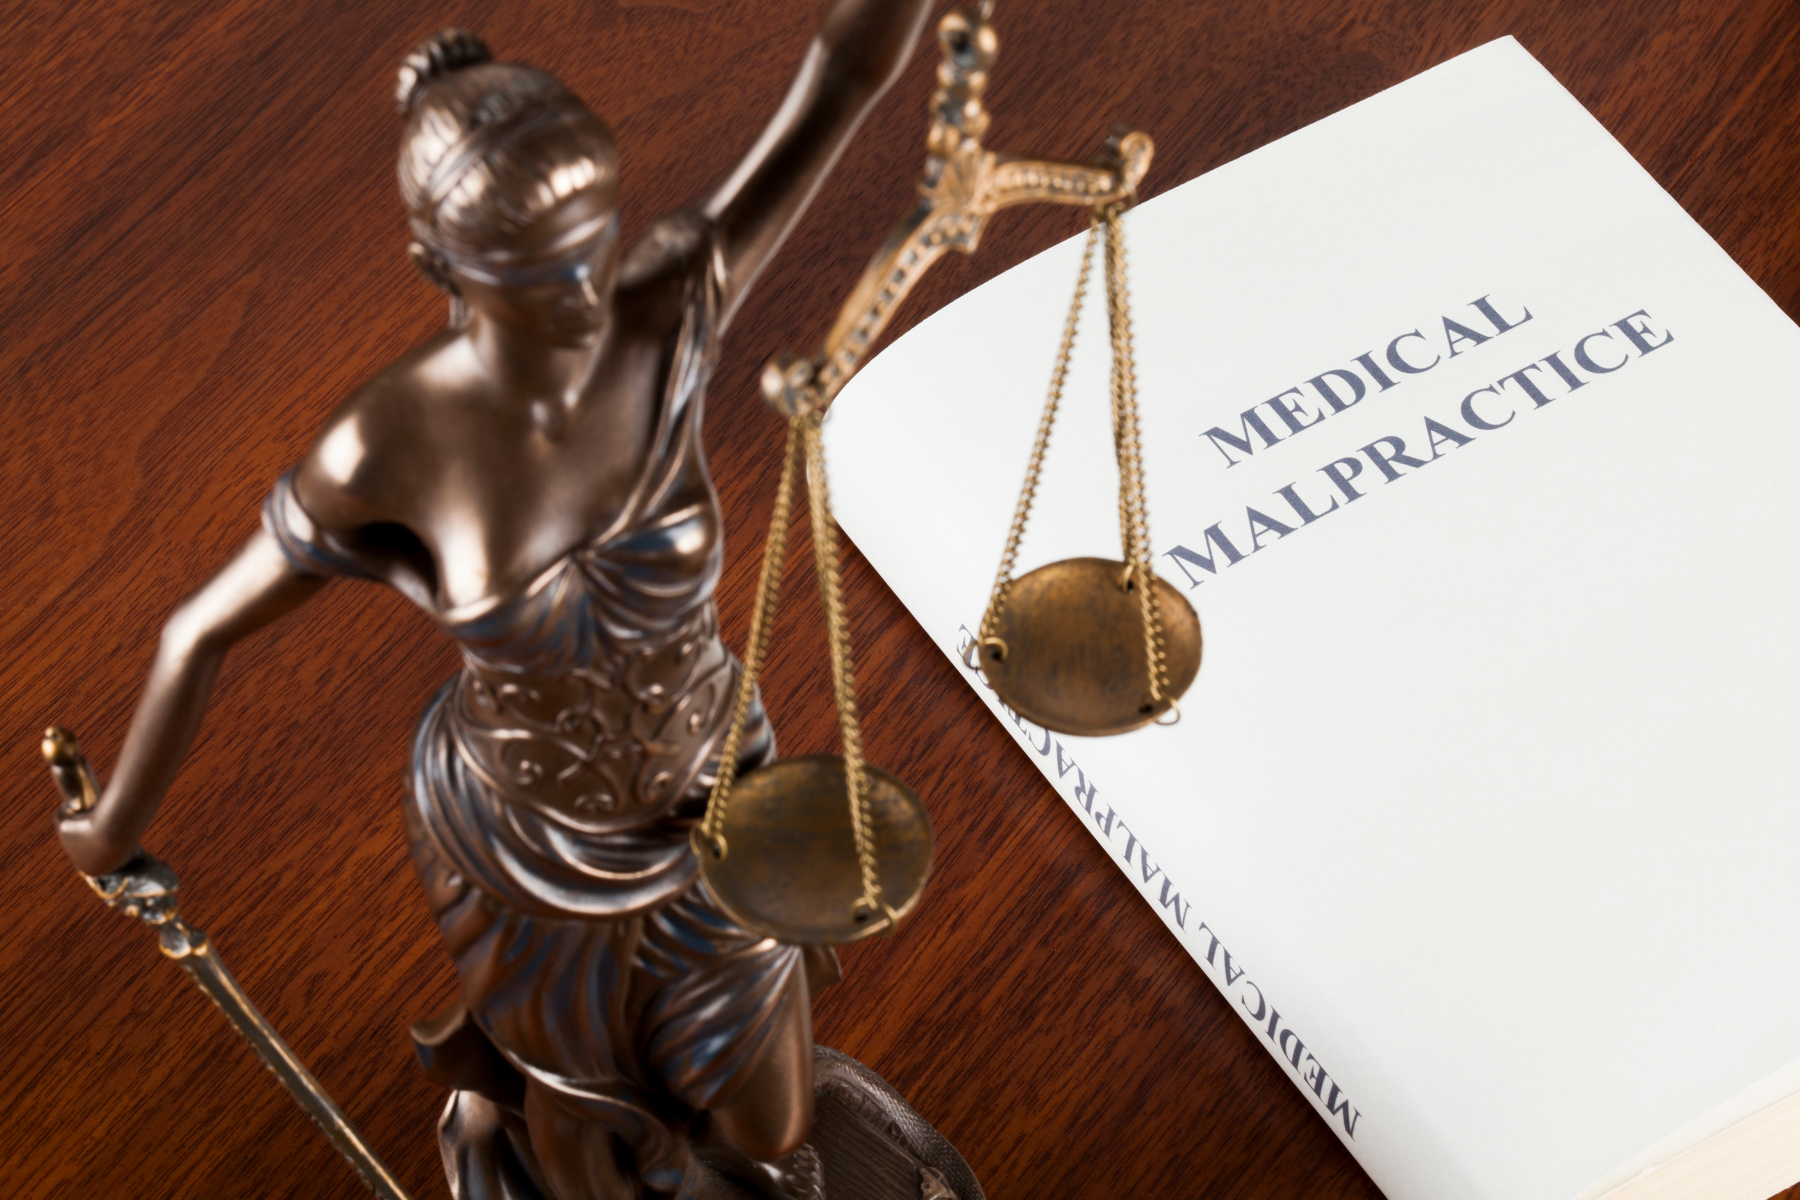 Striking a Jury Notice in Malpractice Actions